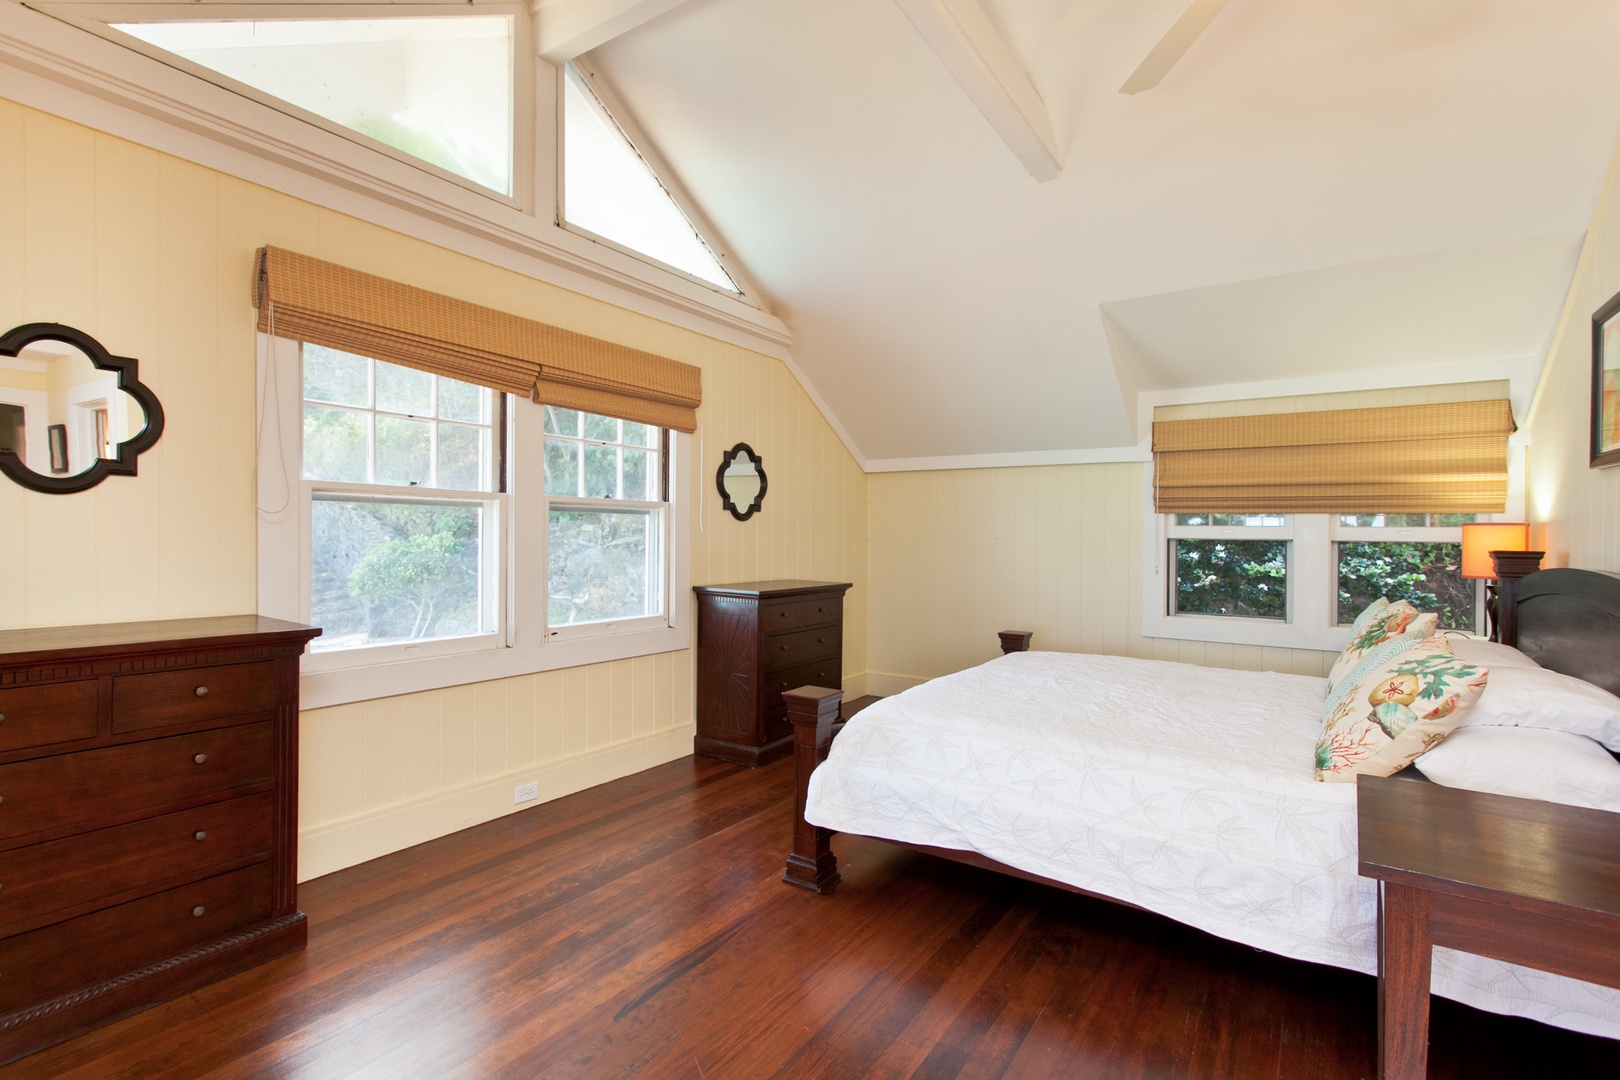 Kailua Vacation Rentals, Hale Mahina Lanikai* - Guest bedroom with a king bed.